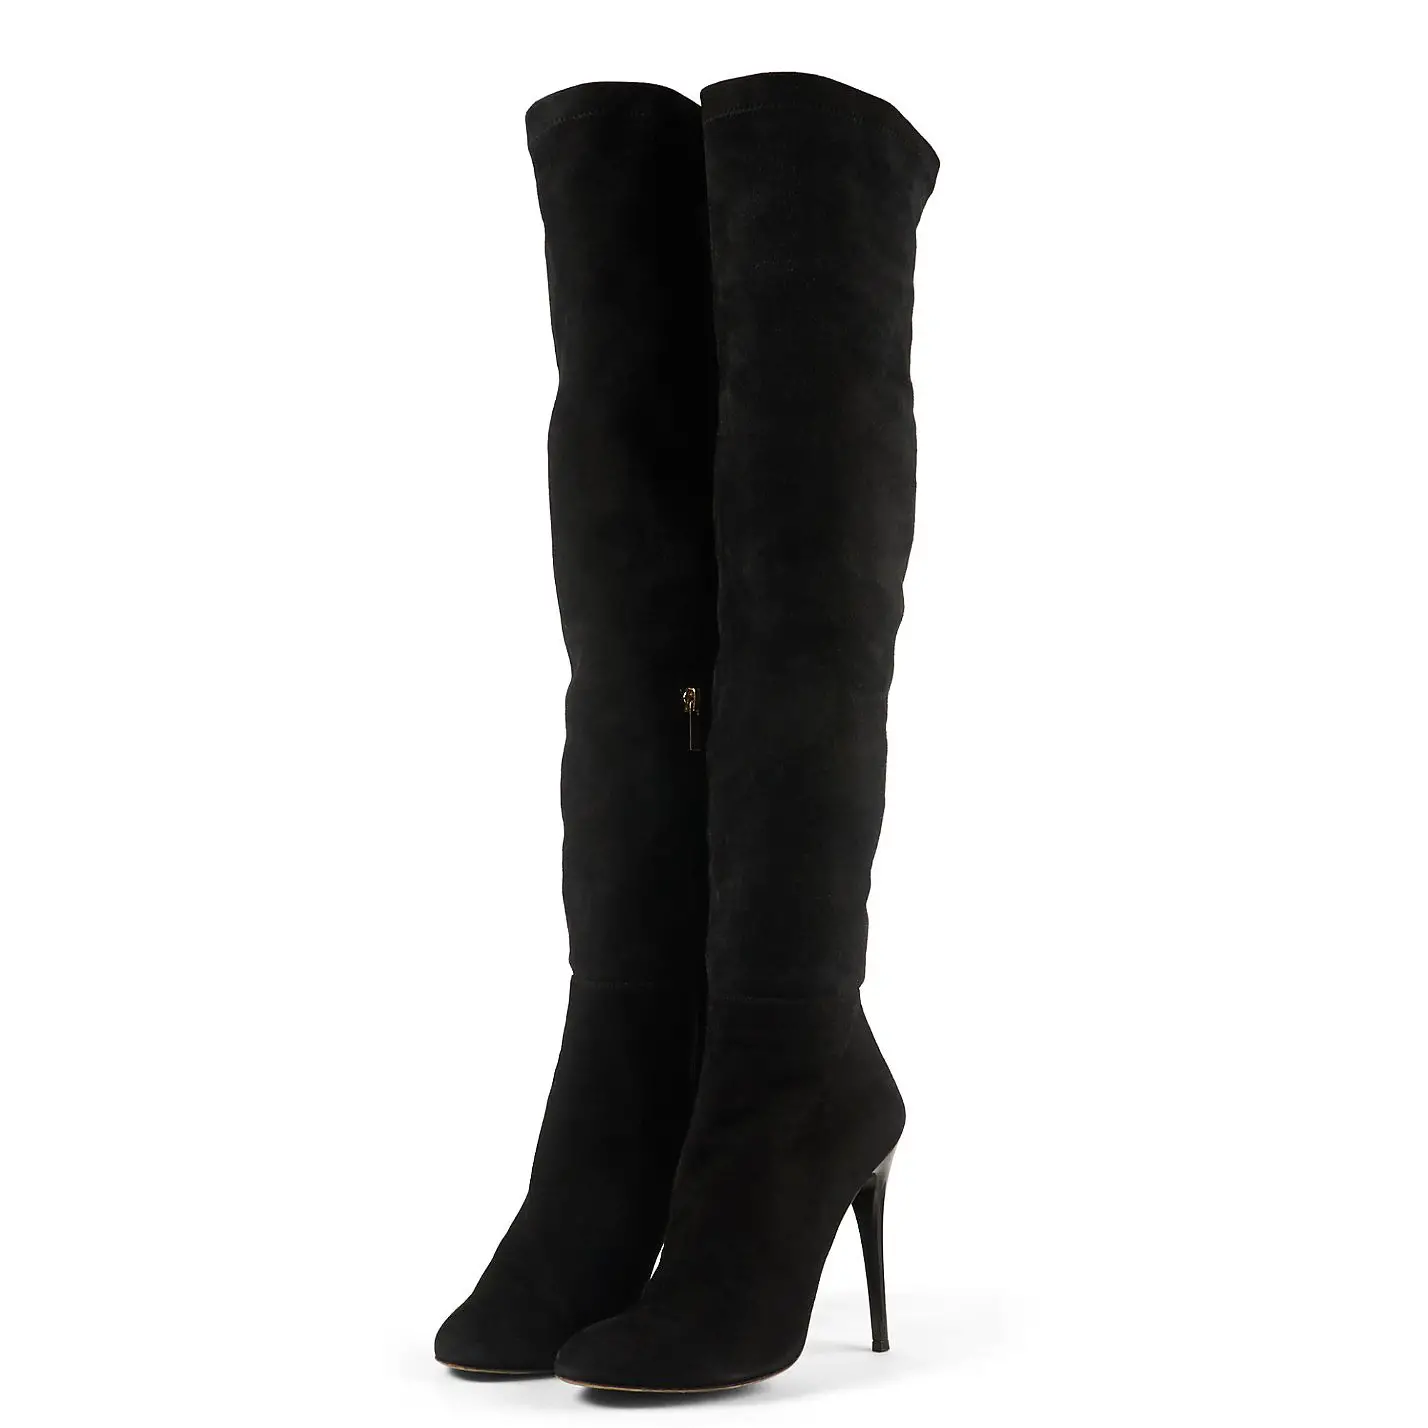 Rent or Buy Jimmy Choo Thigh High Stiletto Boots from MyWardrobeHQ.com